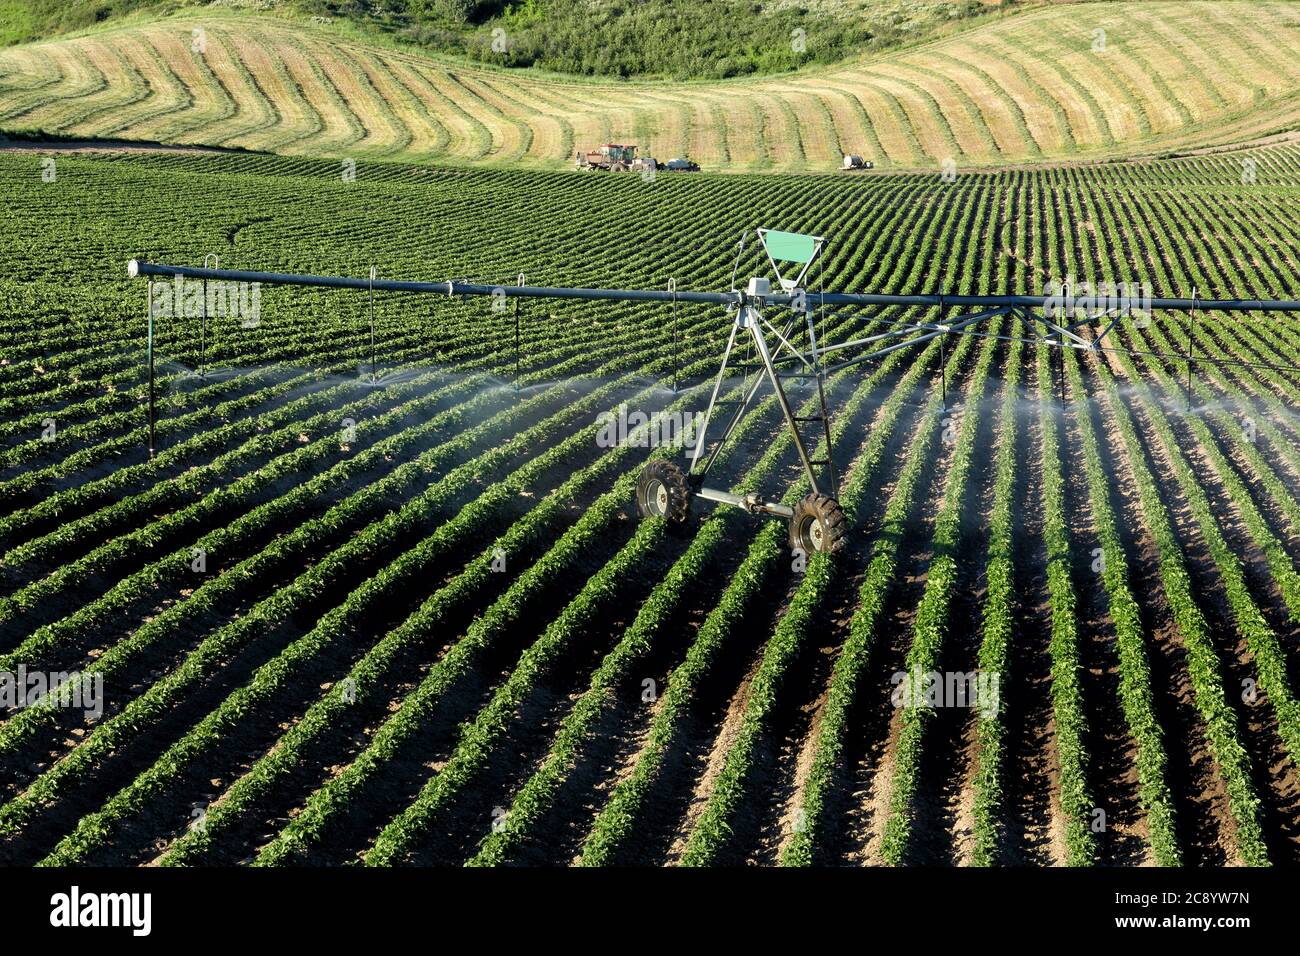 An early morning view of the rows in a field of potatoes in the rolling fertile farm fields of Idaho, with a cut and windrowed hay field in the backgr Stock Photo